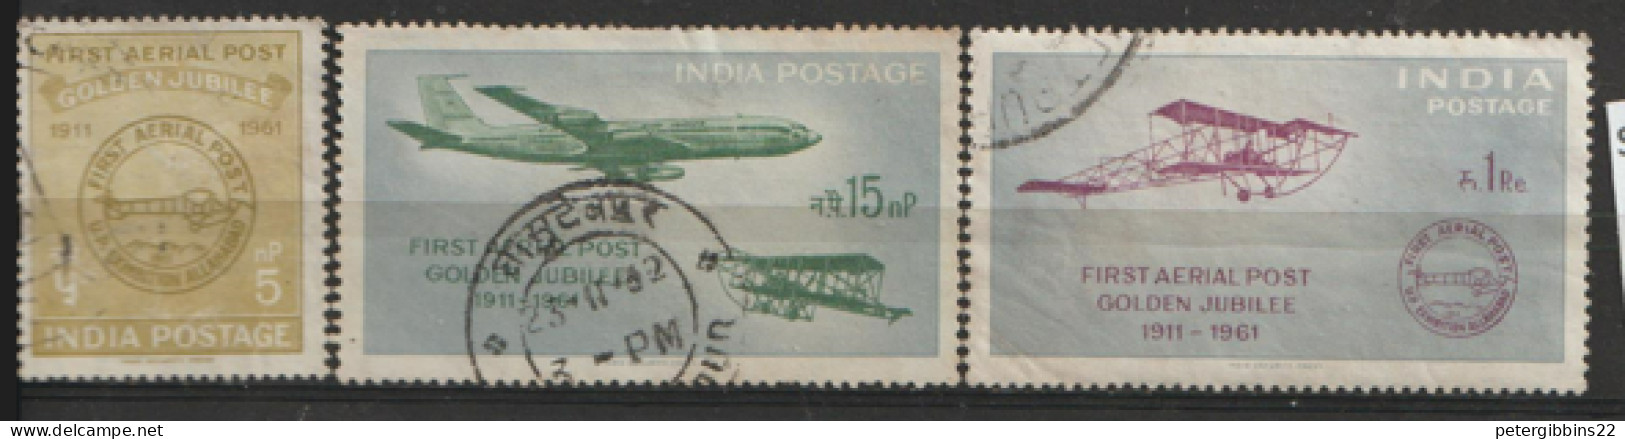 India  1960 SG  434-6  First Air Mail   Fine Used   - Oblitérés